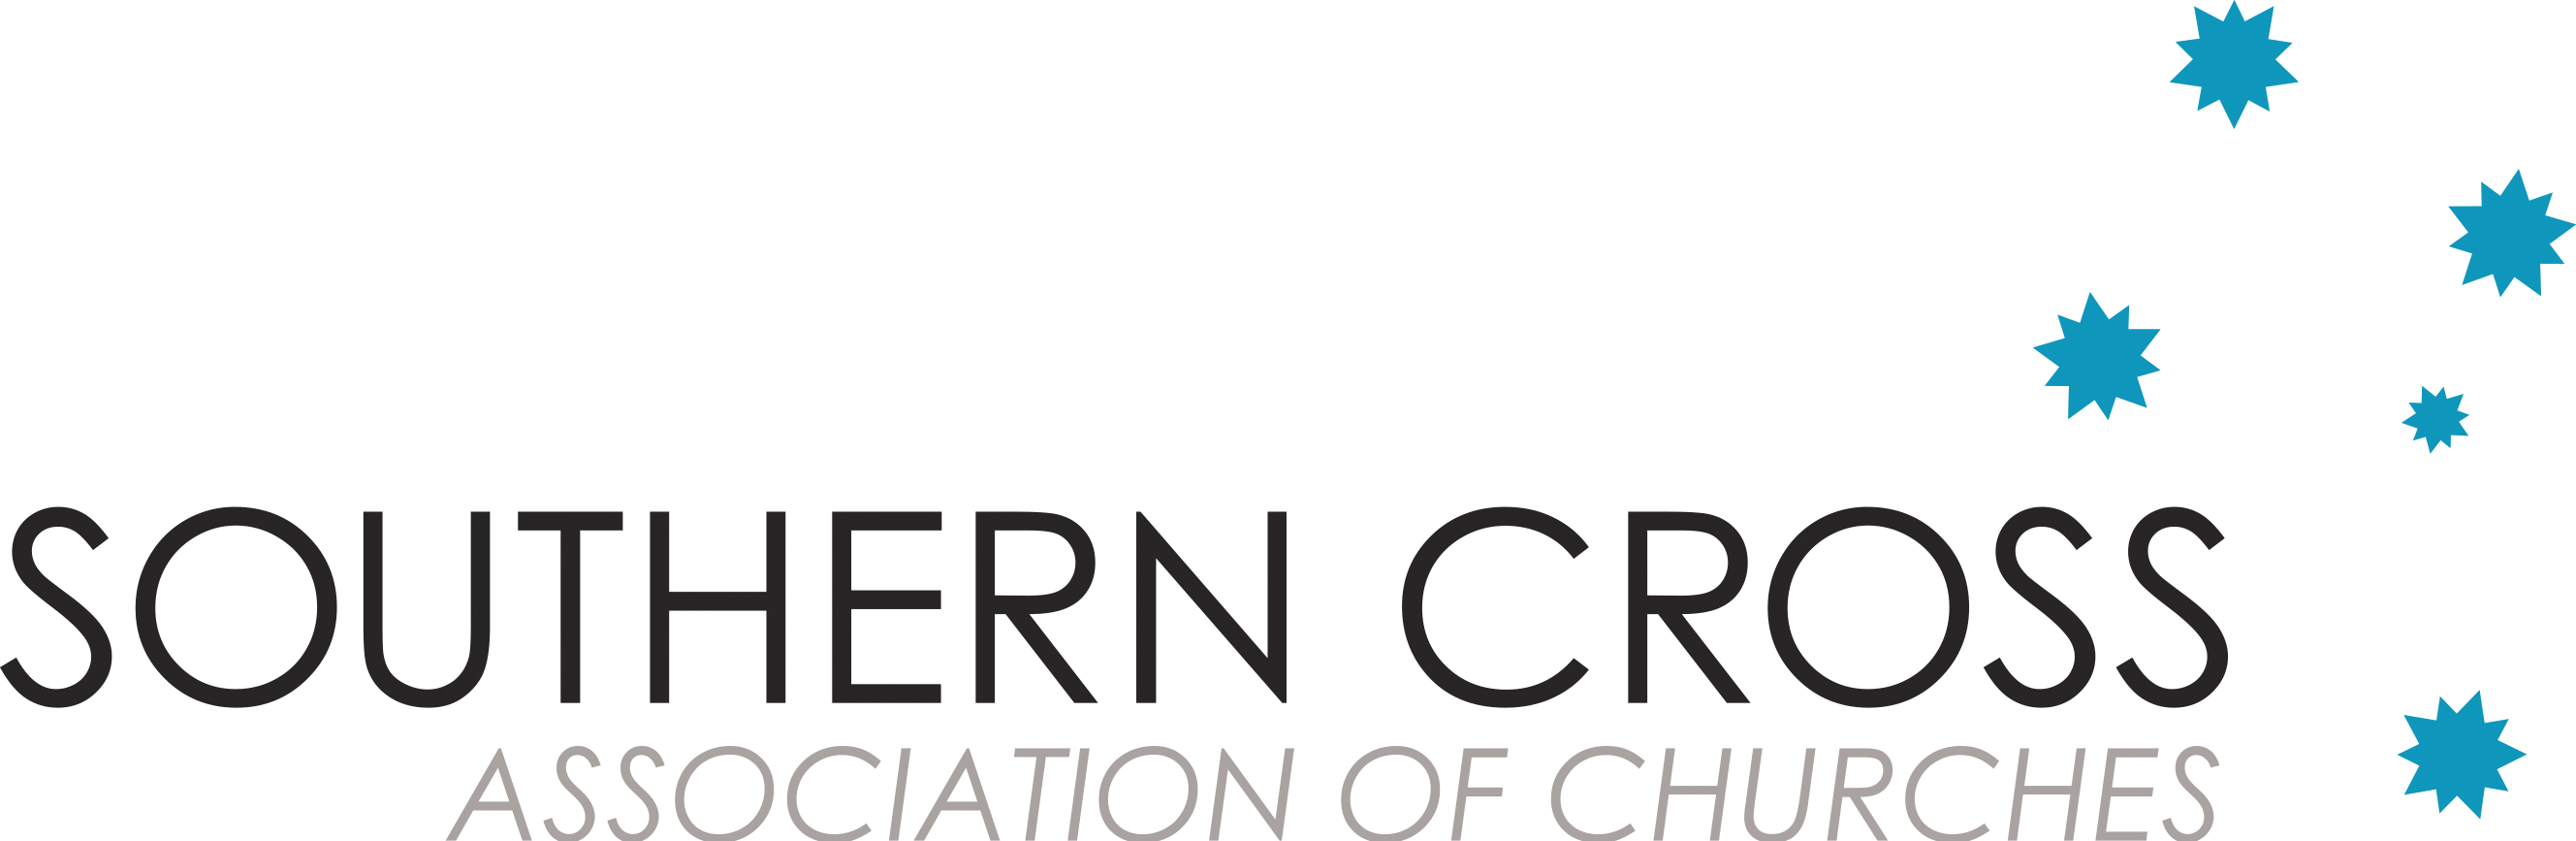 Southern Cross Association of Churches